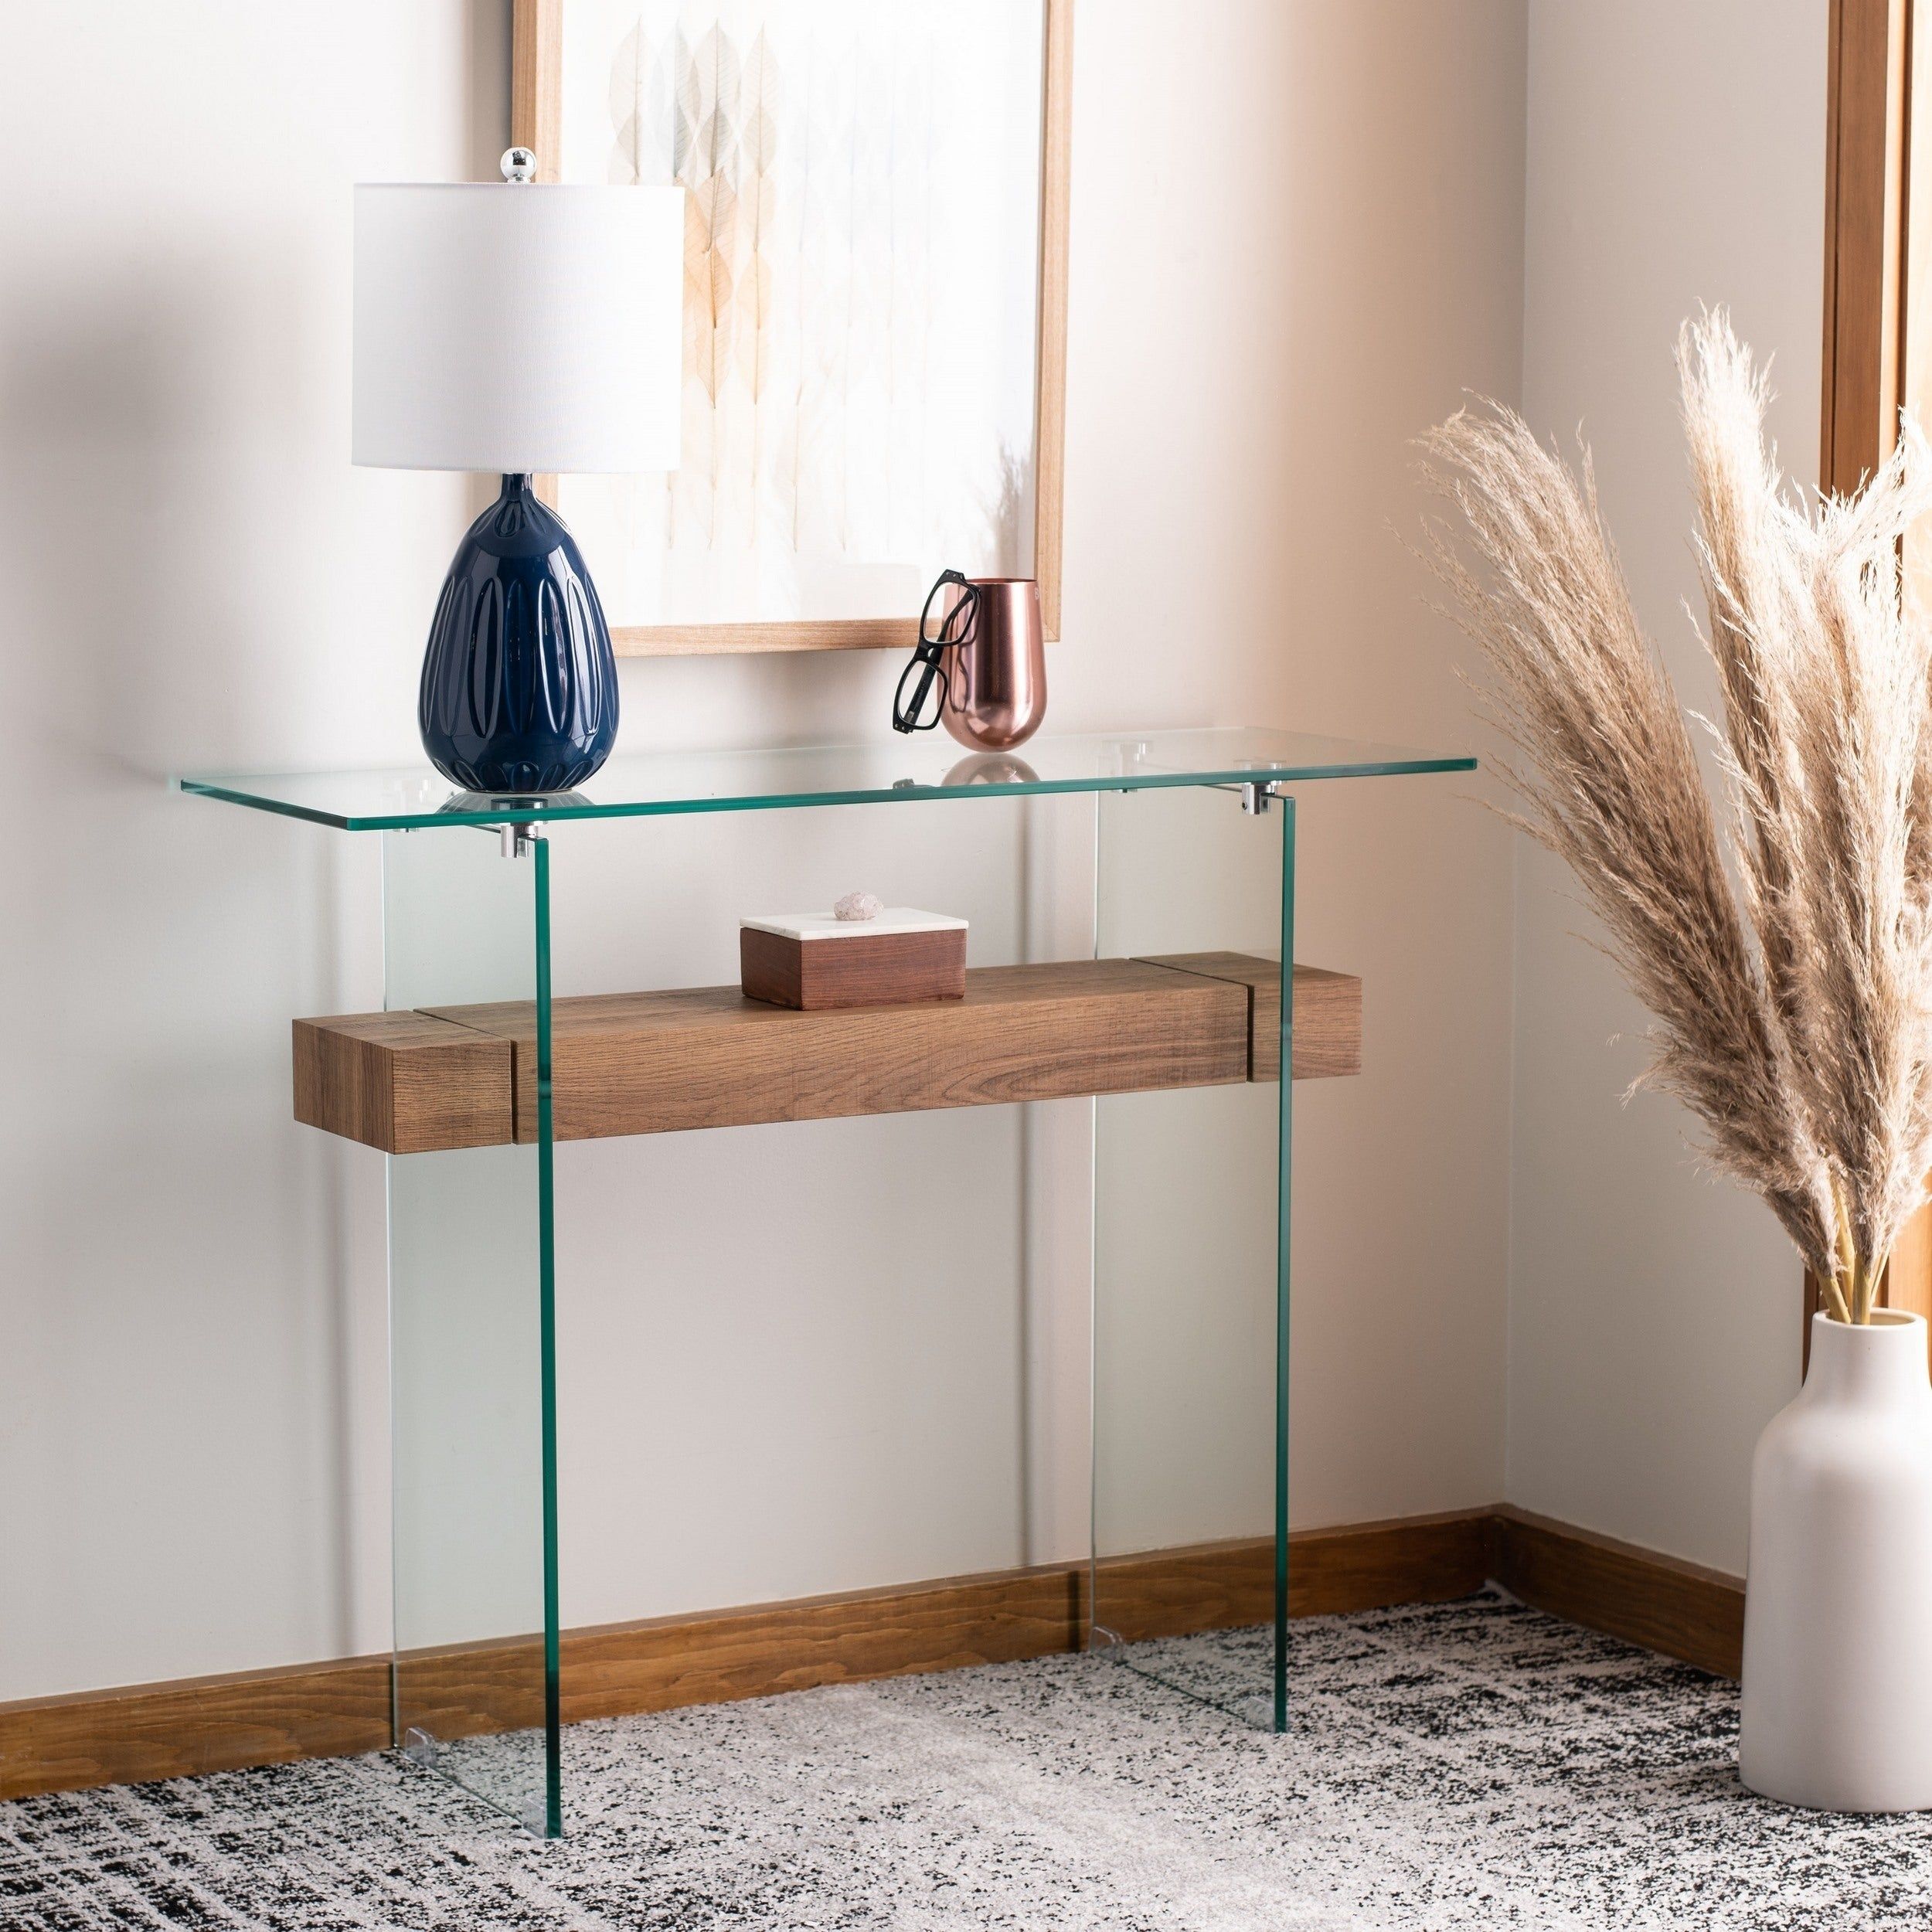 Safavieh Kayley Rectangular Modern Glass Console Table, Natural Brown For Modern Console Tables (View 2 of 20)